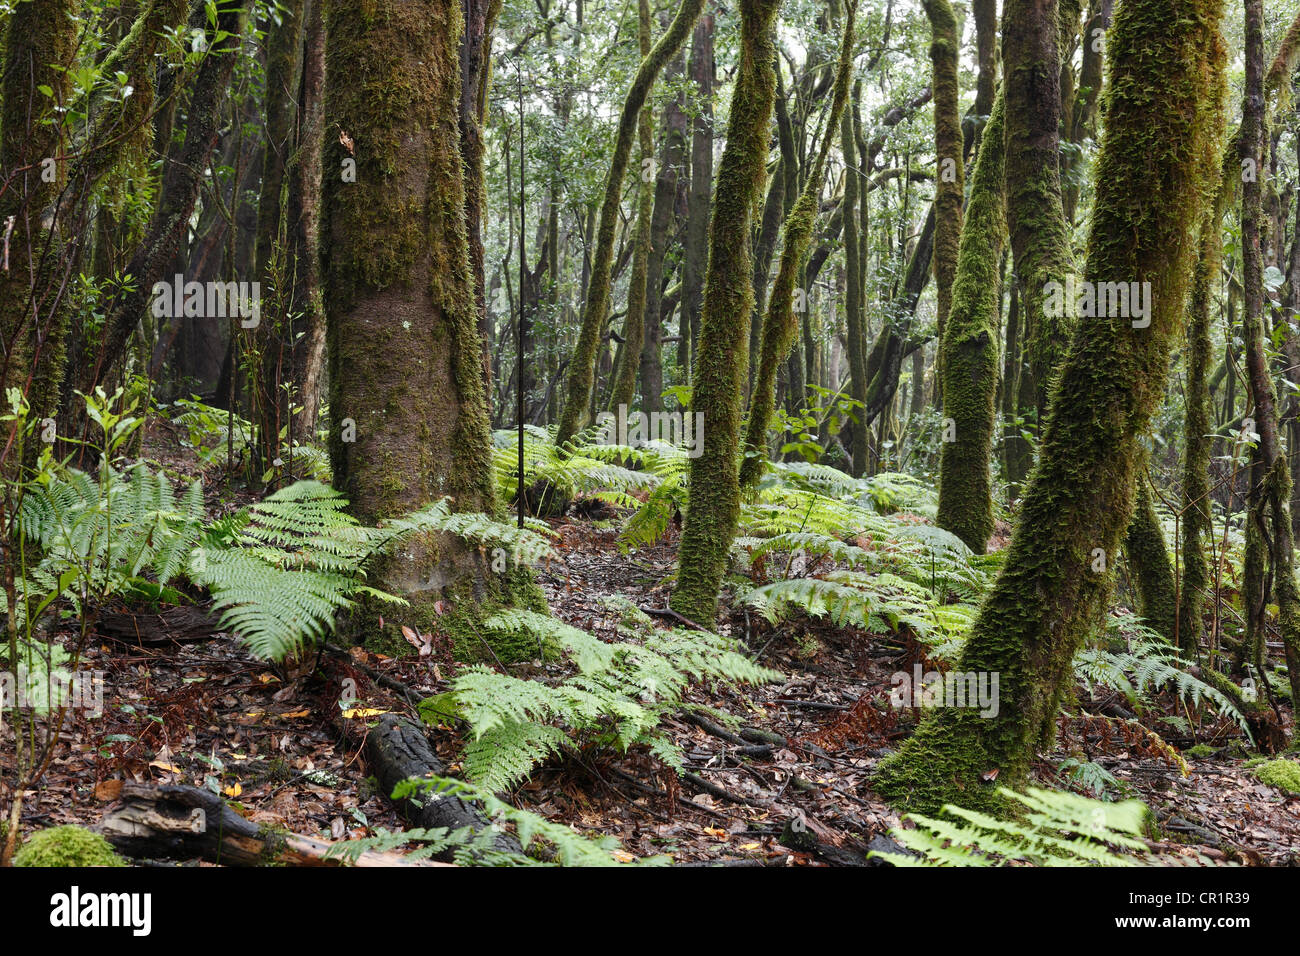 Ferns in the laurel forest, Garajonay National Park, UNESCO World Heritage Site, La Gomera, Canary Islands, Spain, Europe Stock Photo